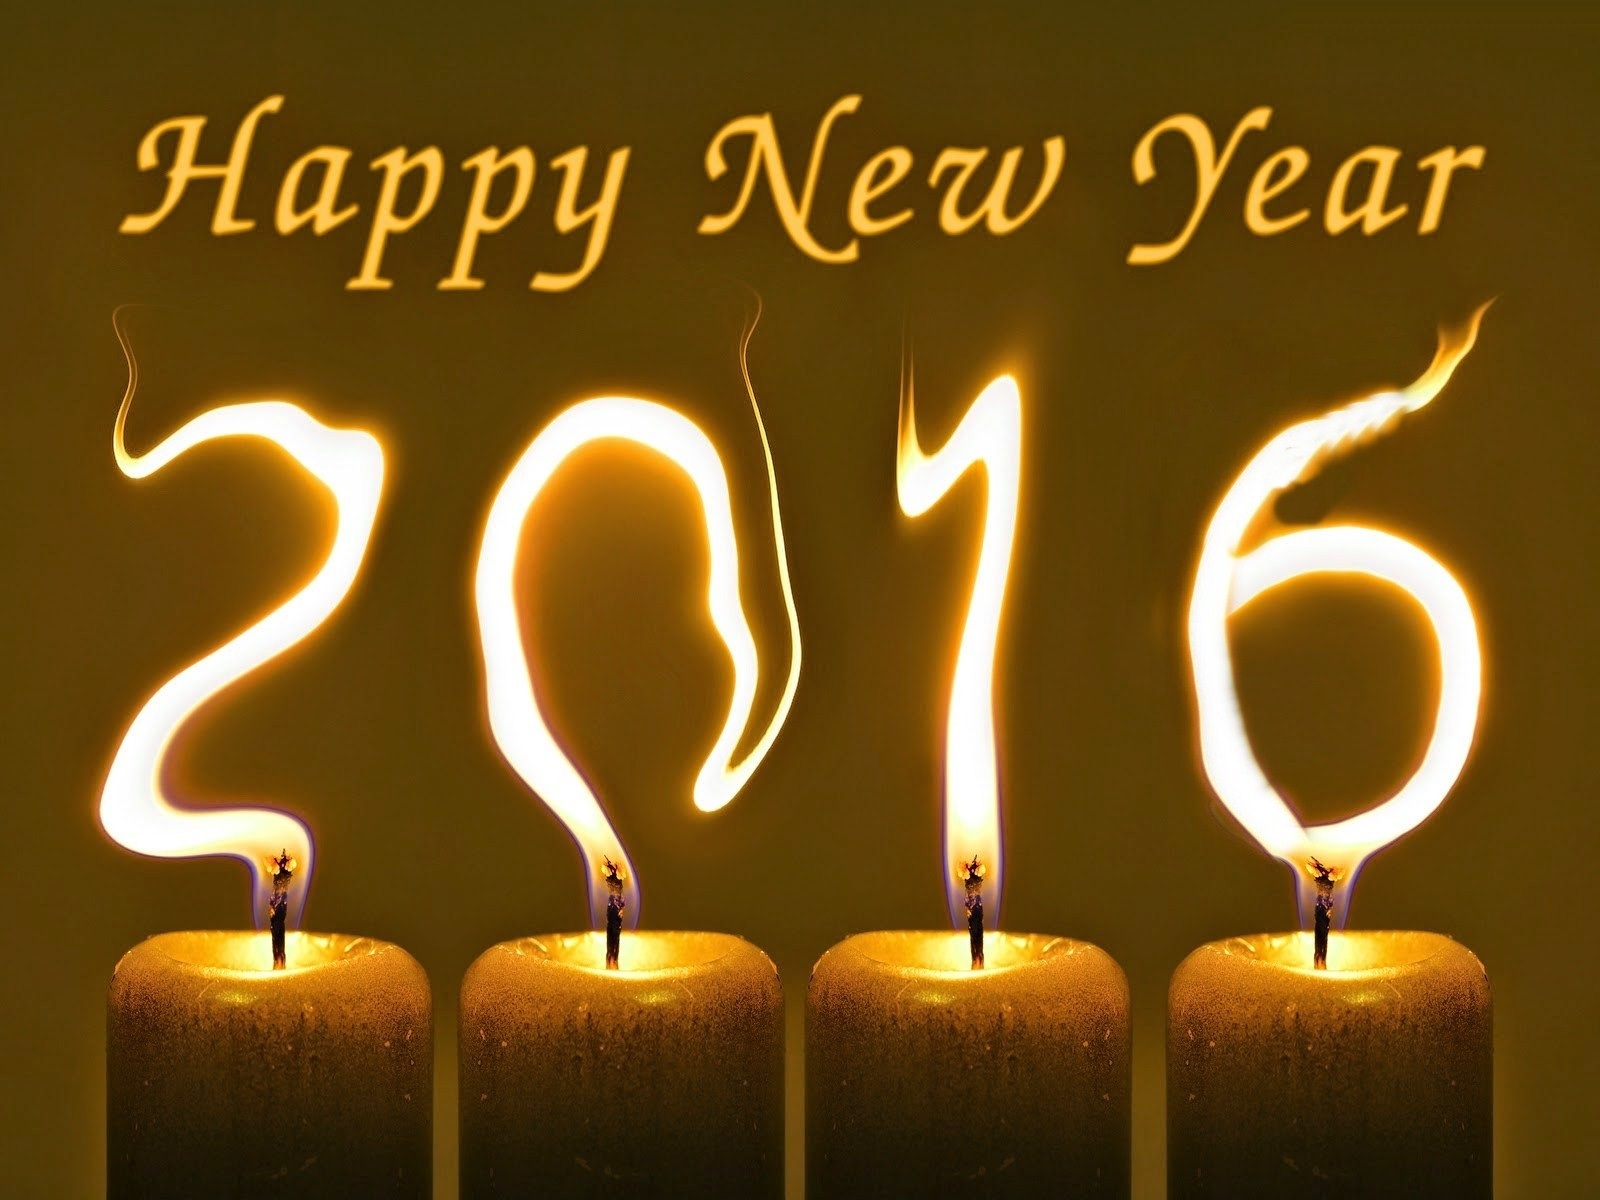 Happy New Year 2016 HD Wallpapers s